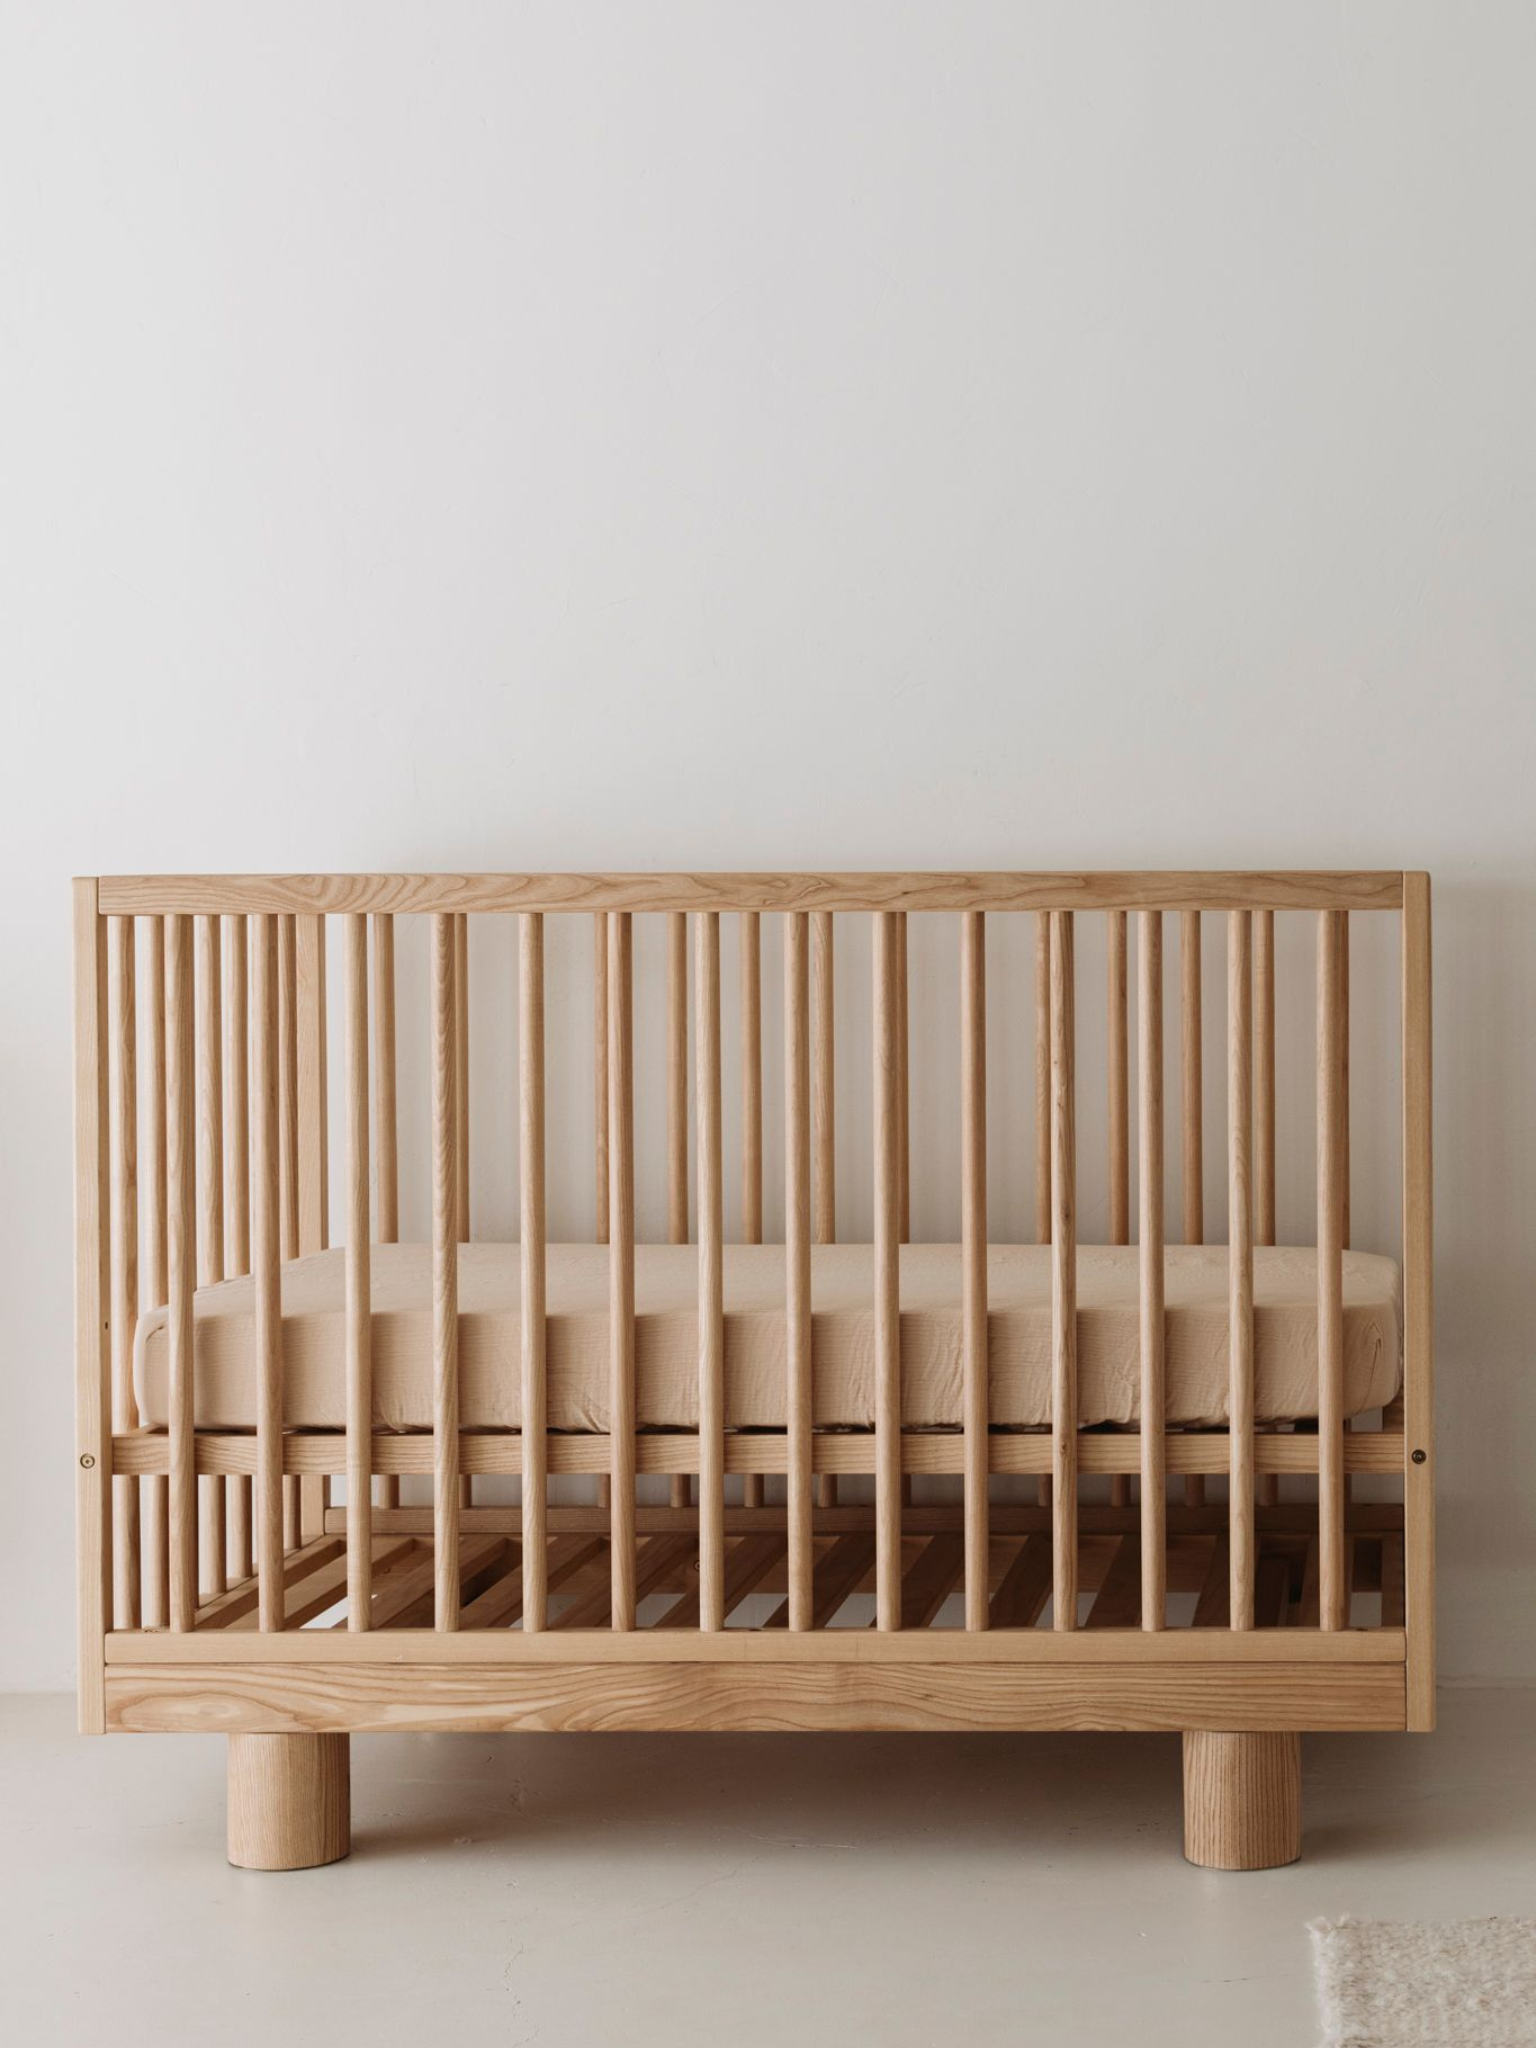 The Importance of Cot Safety Standards